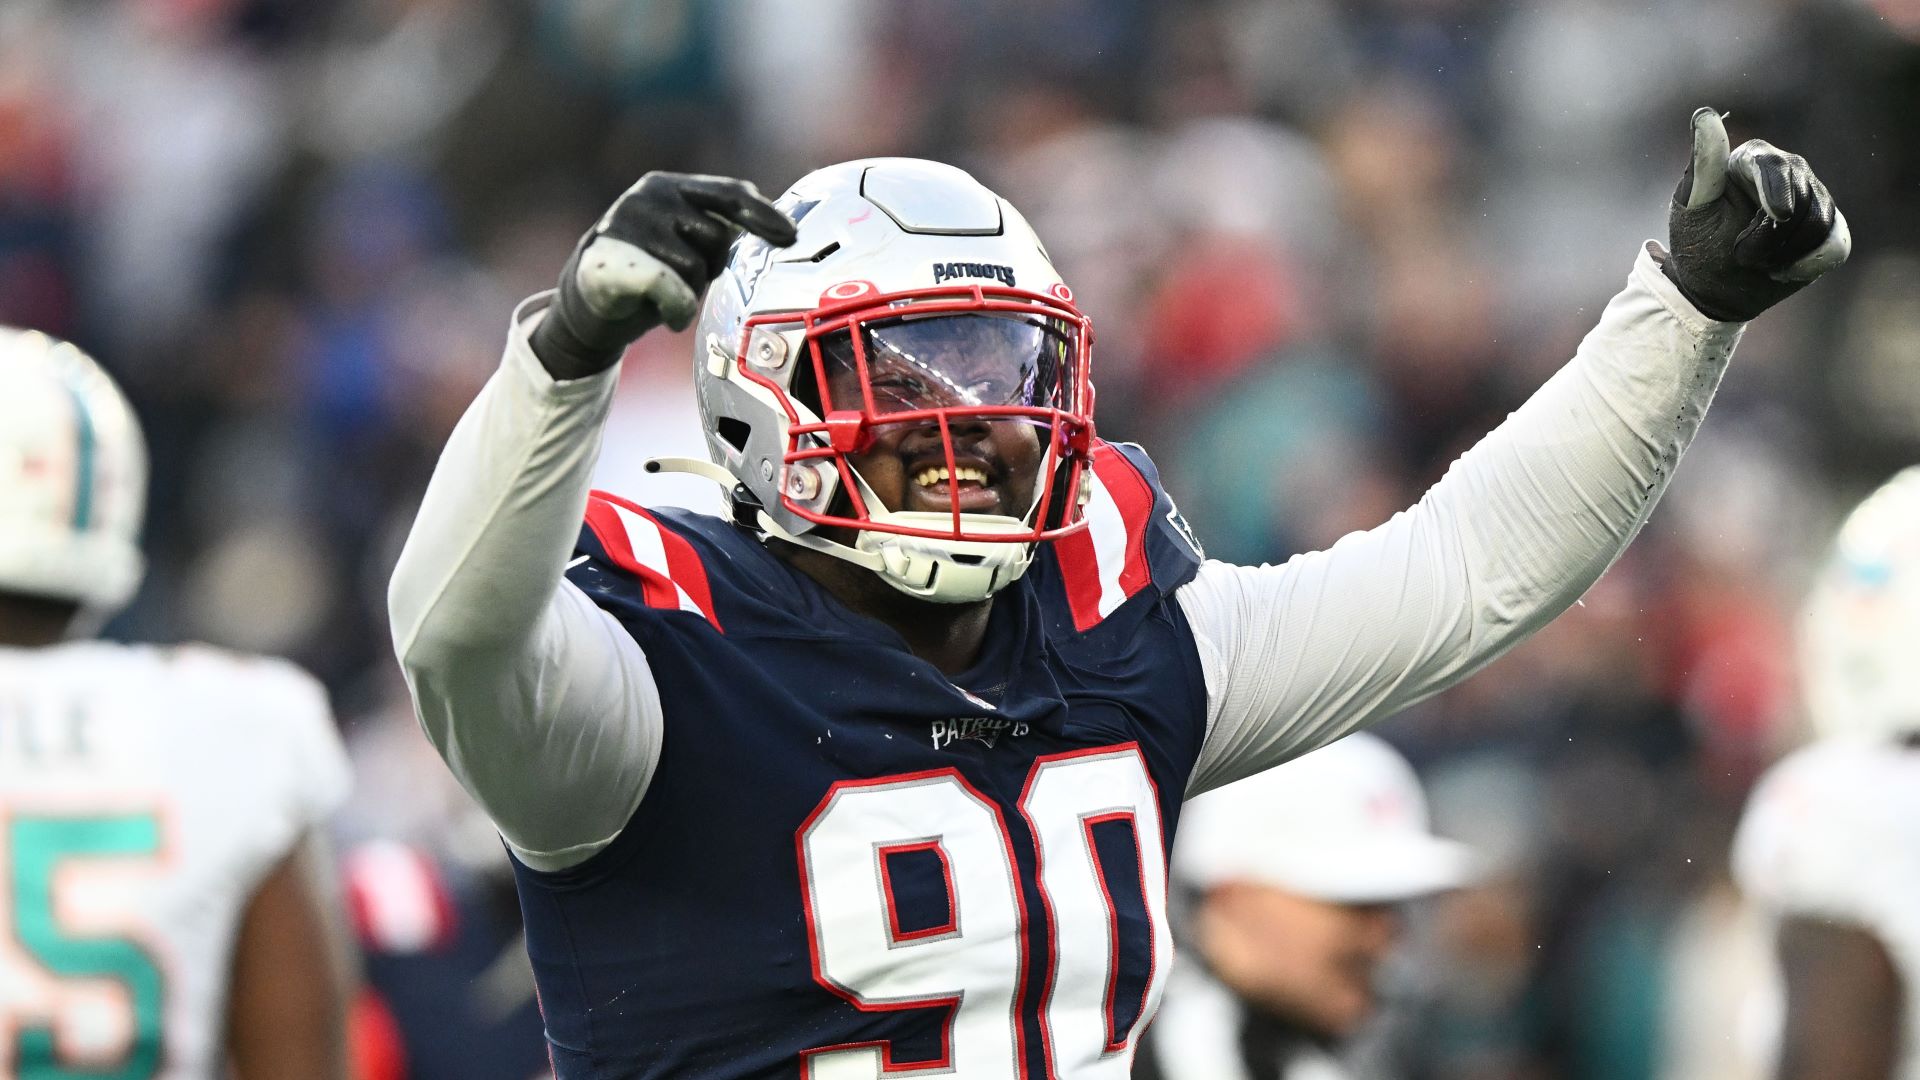 Pay Up? This Emerging Patriots Star Could ‘Cash In’ Next Free
Agency